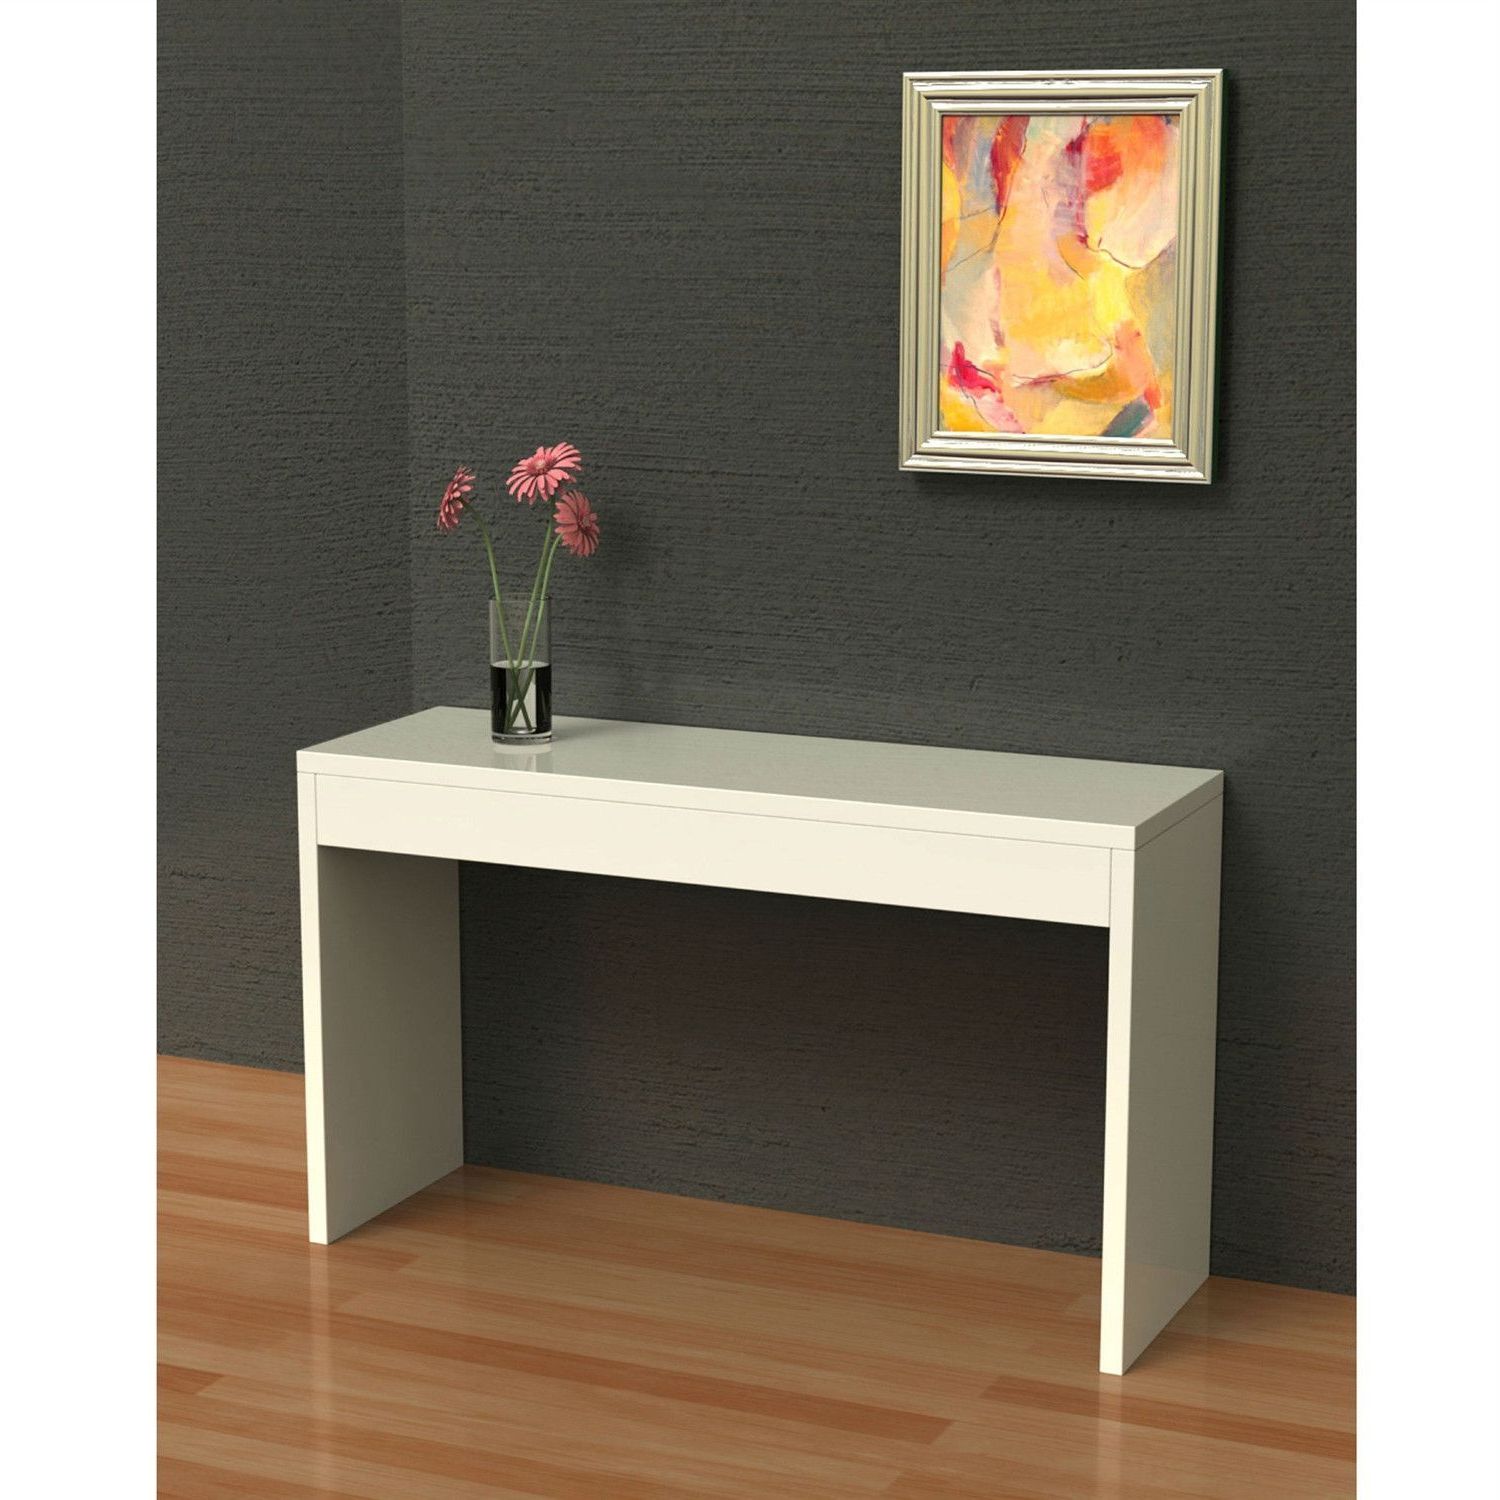 Geometric White Console Tables In Widely Used White Sofa Table Modern Entryway Living Room Console Table (View 5 of 10)